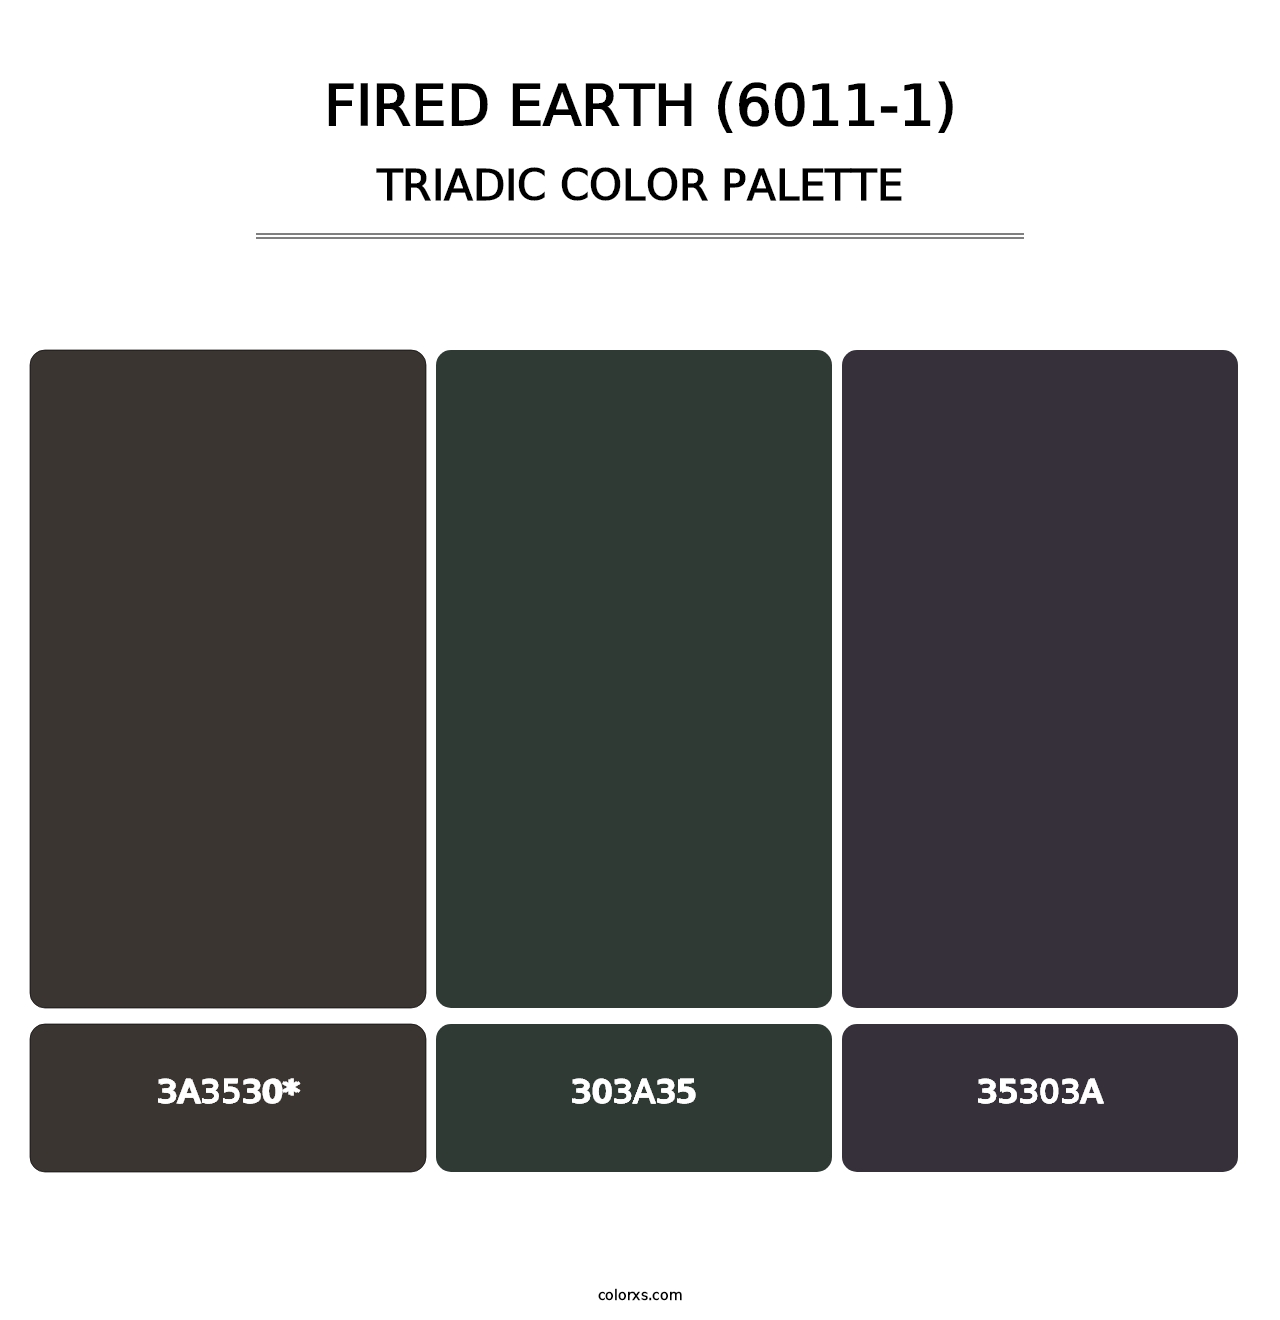 Fired Earth (6011-1) - Triadic Color Palette